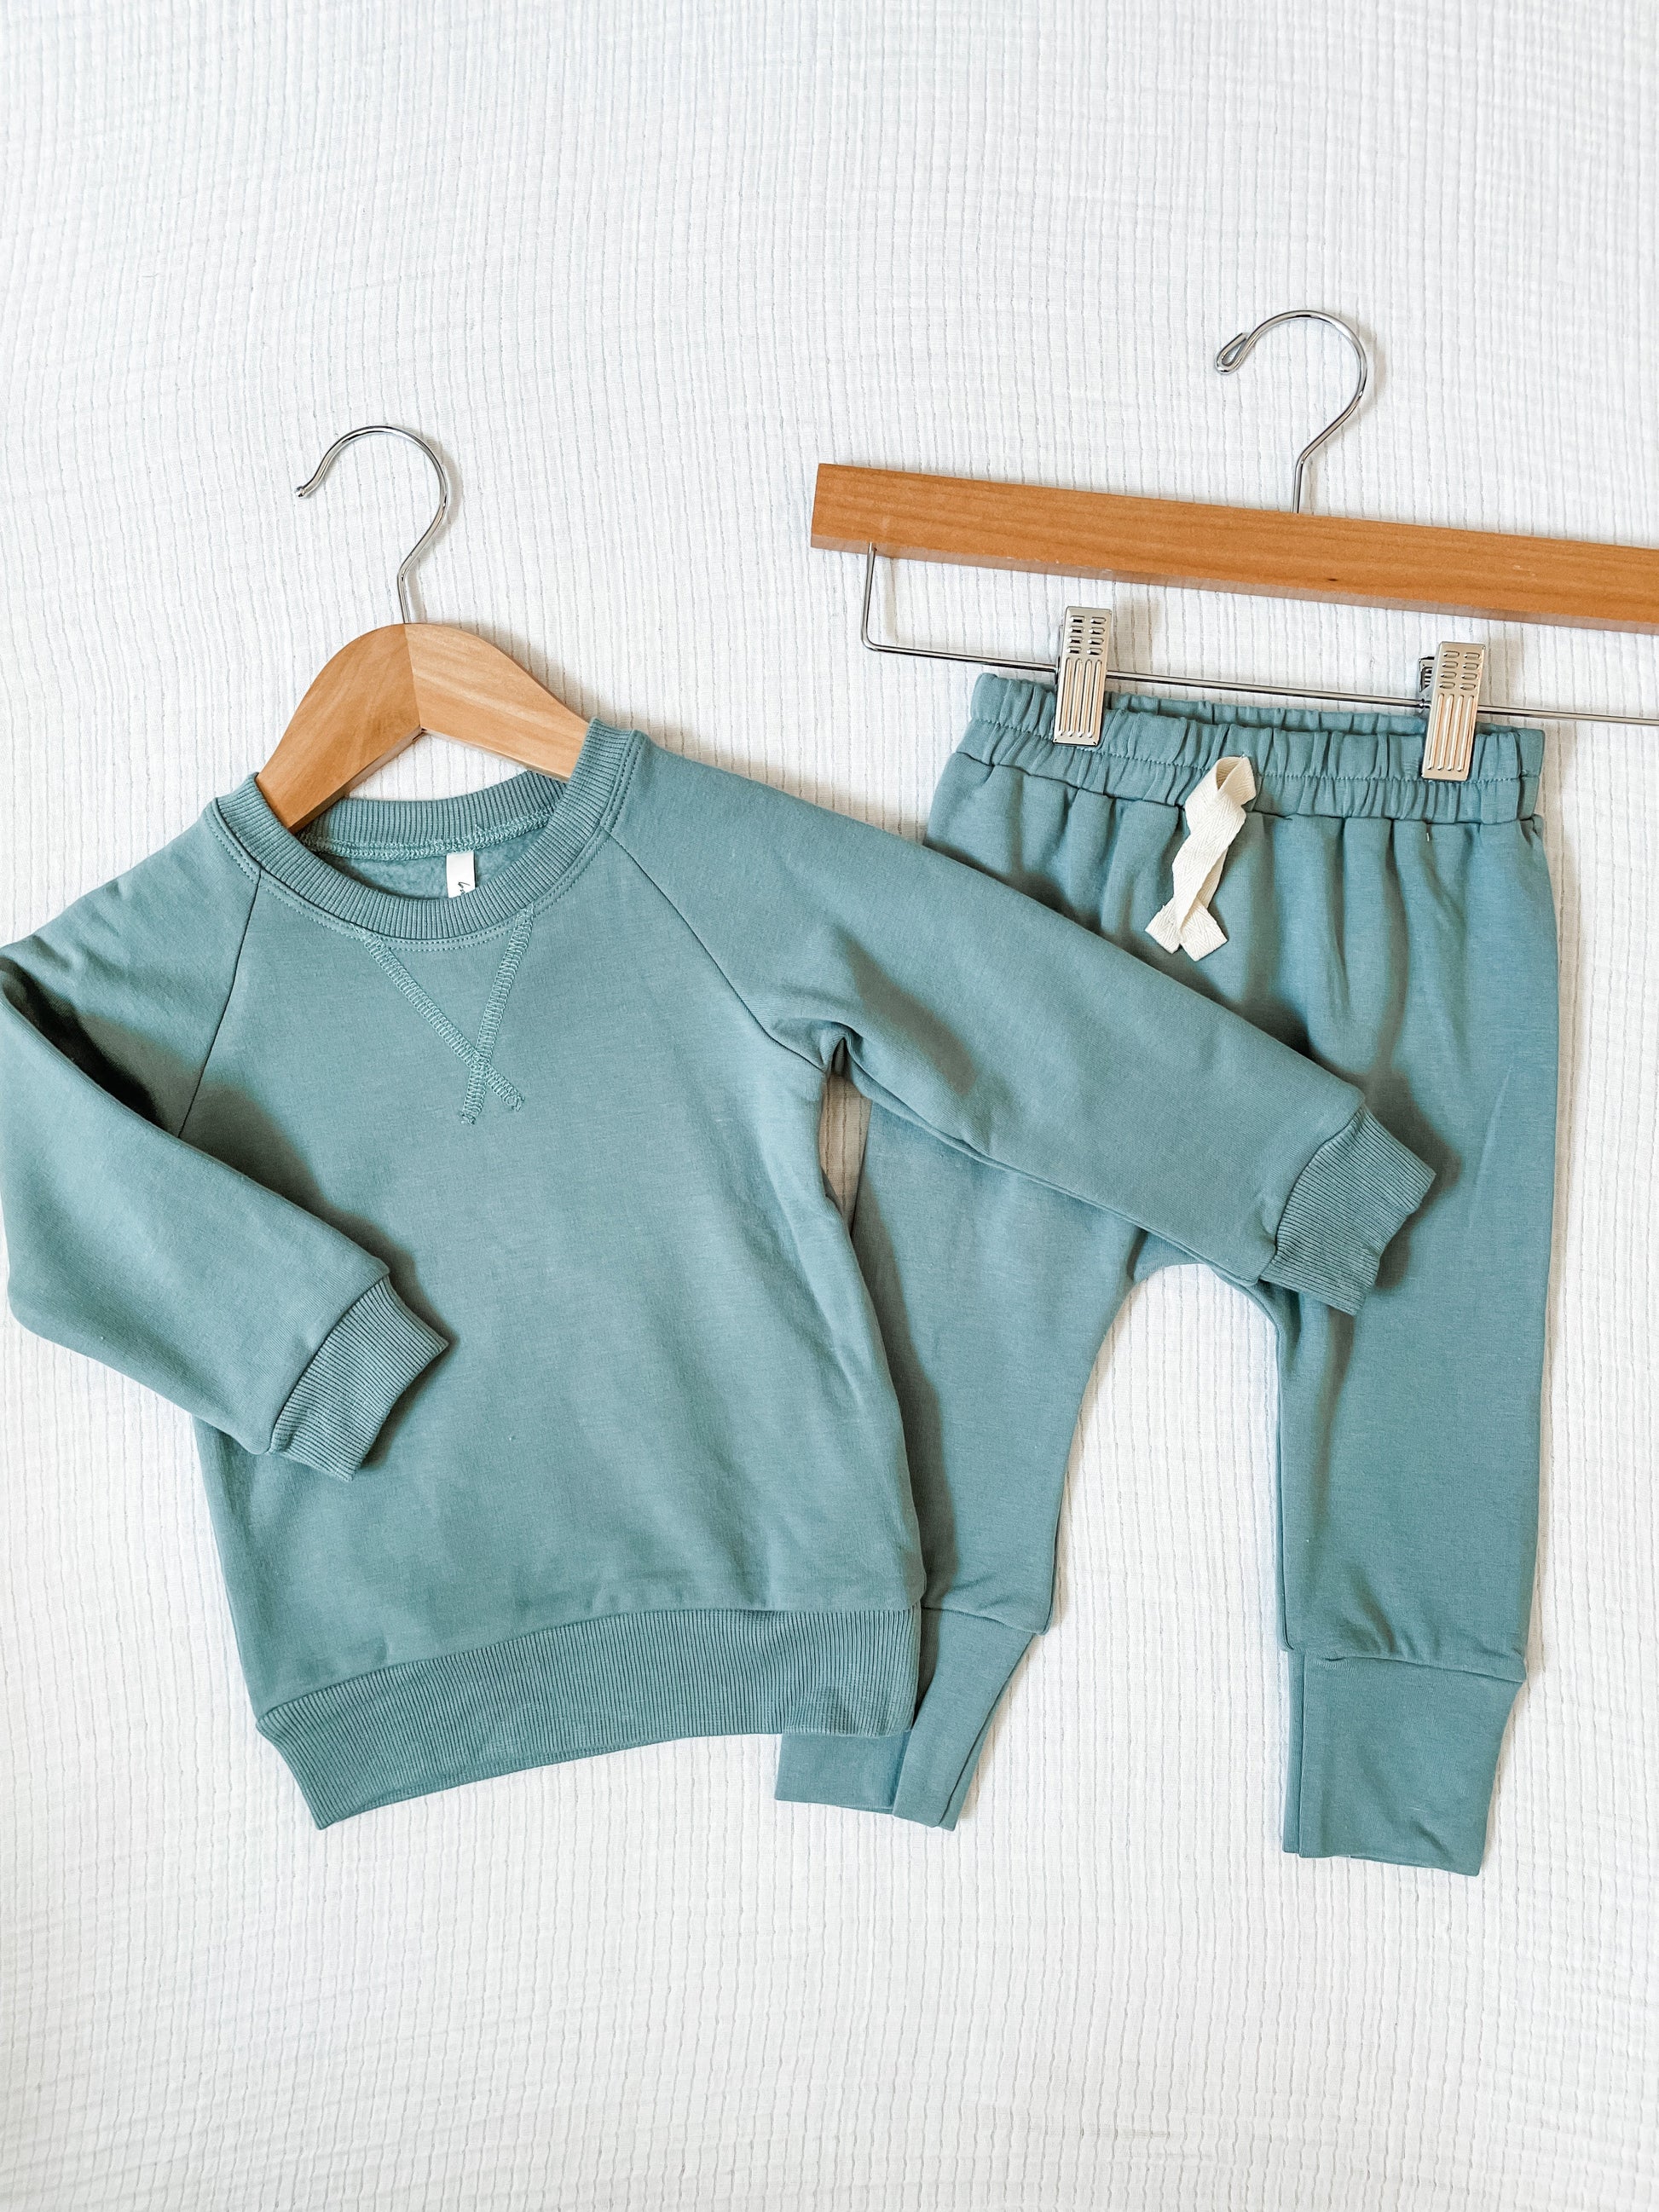 covelAsher Slim Harems - Stone Blue - Premium pants from babysprouts clothing company - Just $25! Shop now at covel12-24, baby, baby bottom, boys, Faire, girls, kid bottom, Toddlercovel